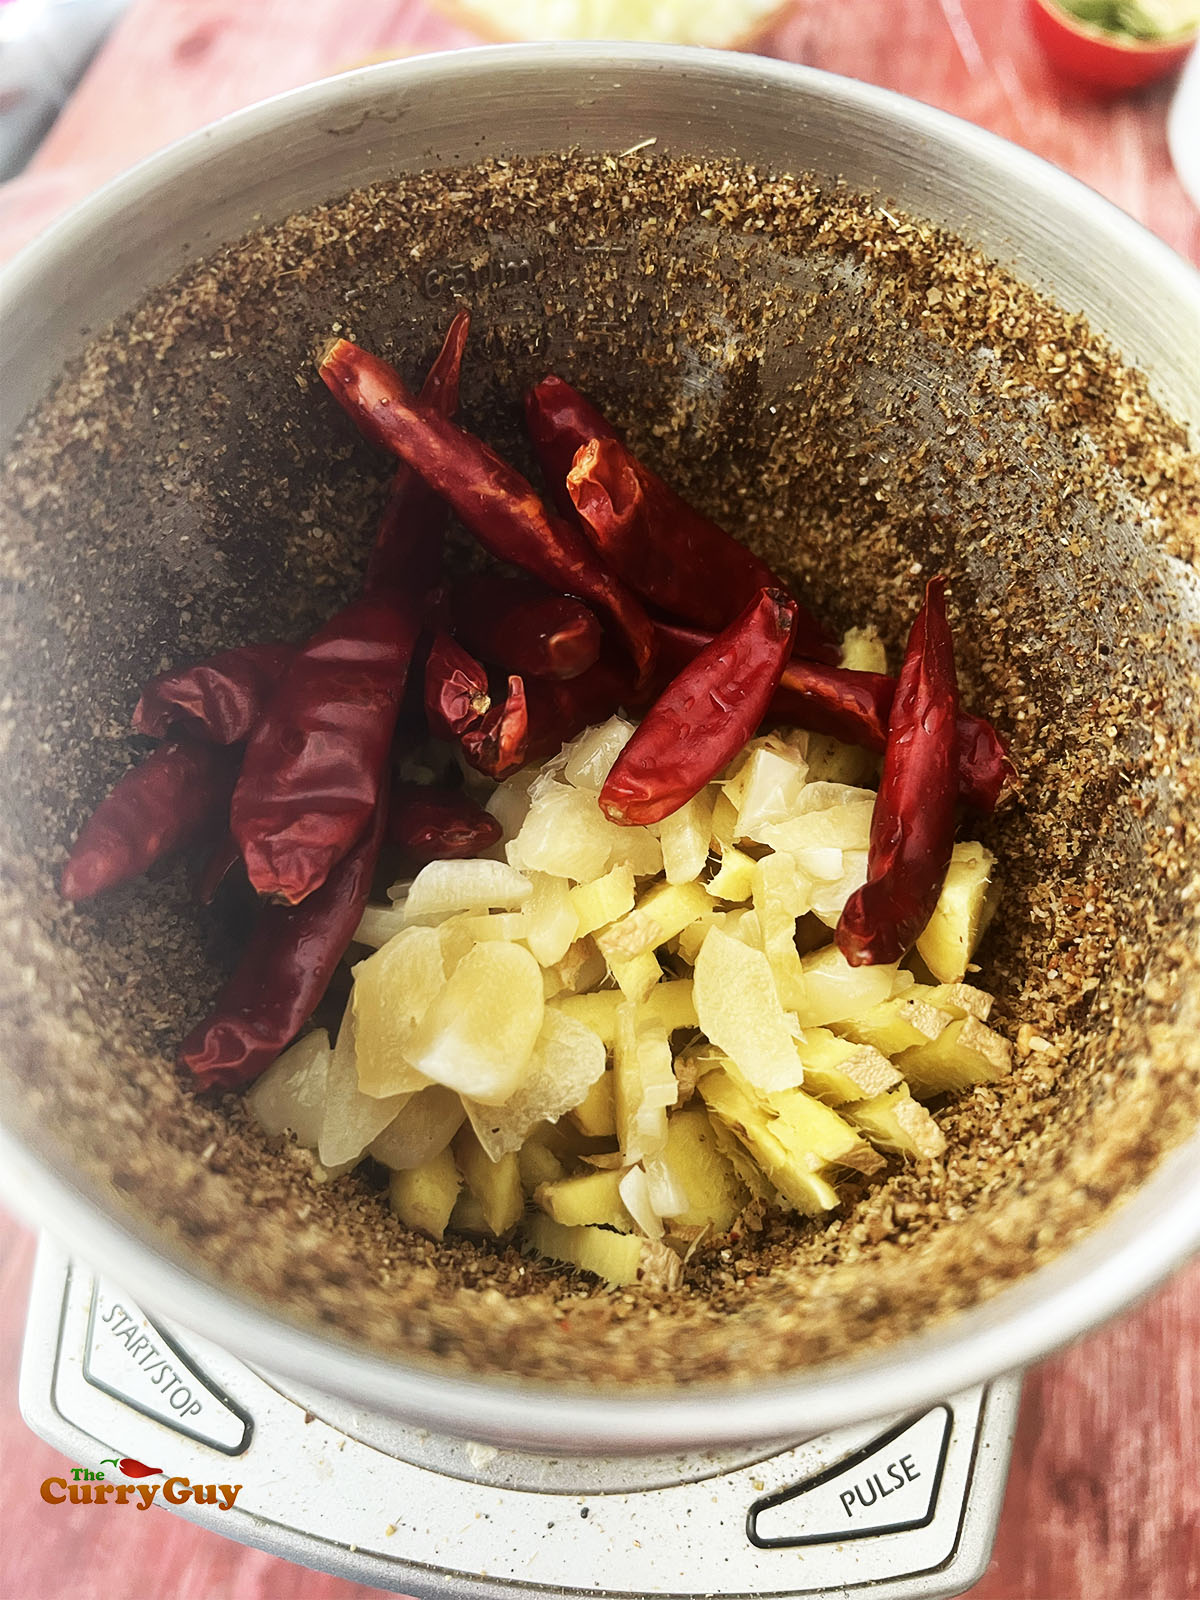 Adding the garlic, ginger and soaked chillies.